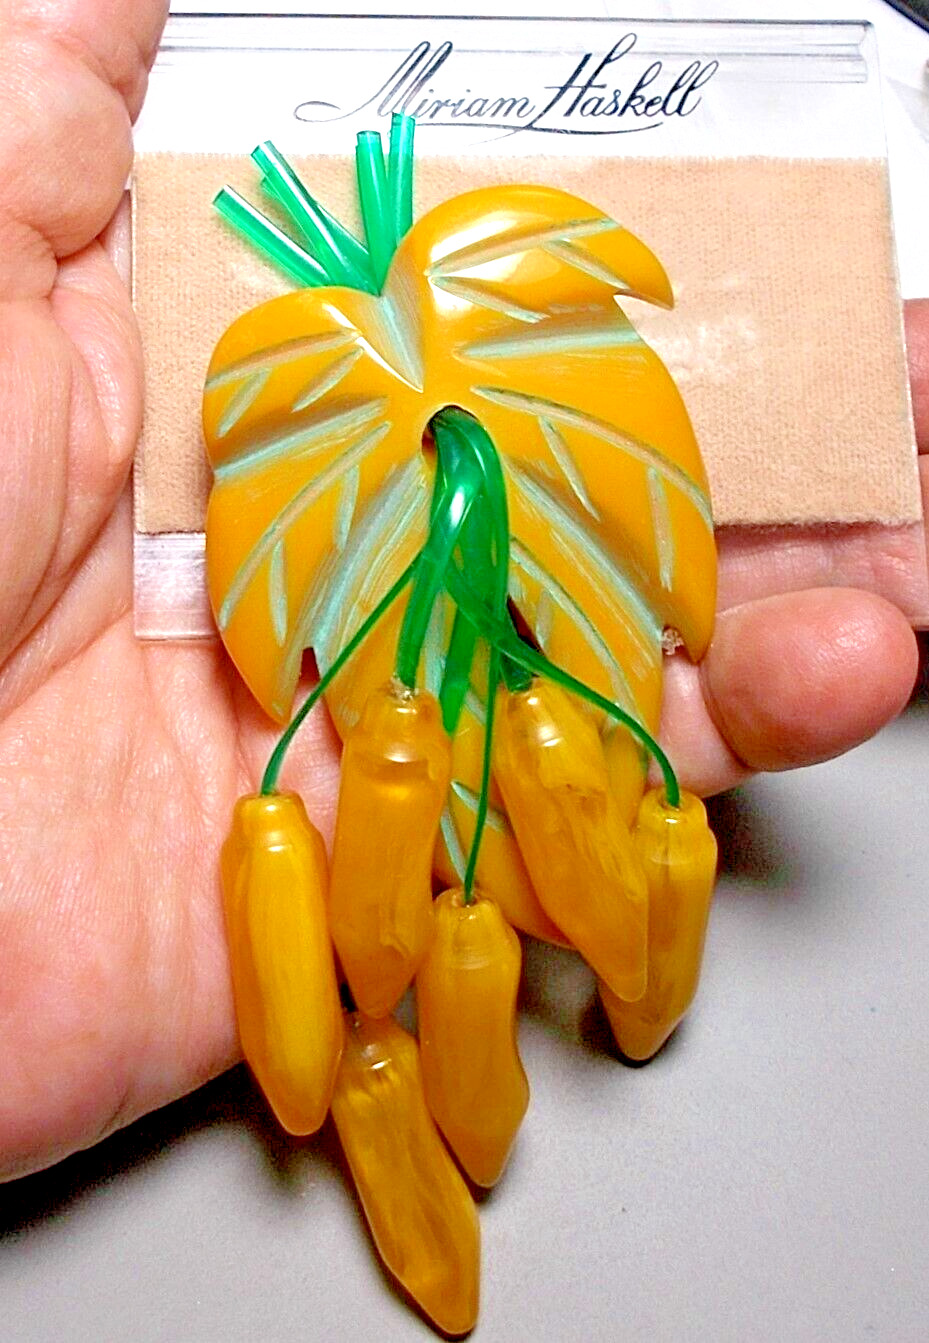 1990s Miriam Haskell BAKELITE BANANA Brooch/ Necklace, Yellow Green, Large Figur